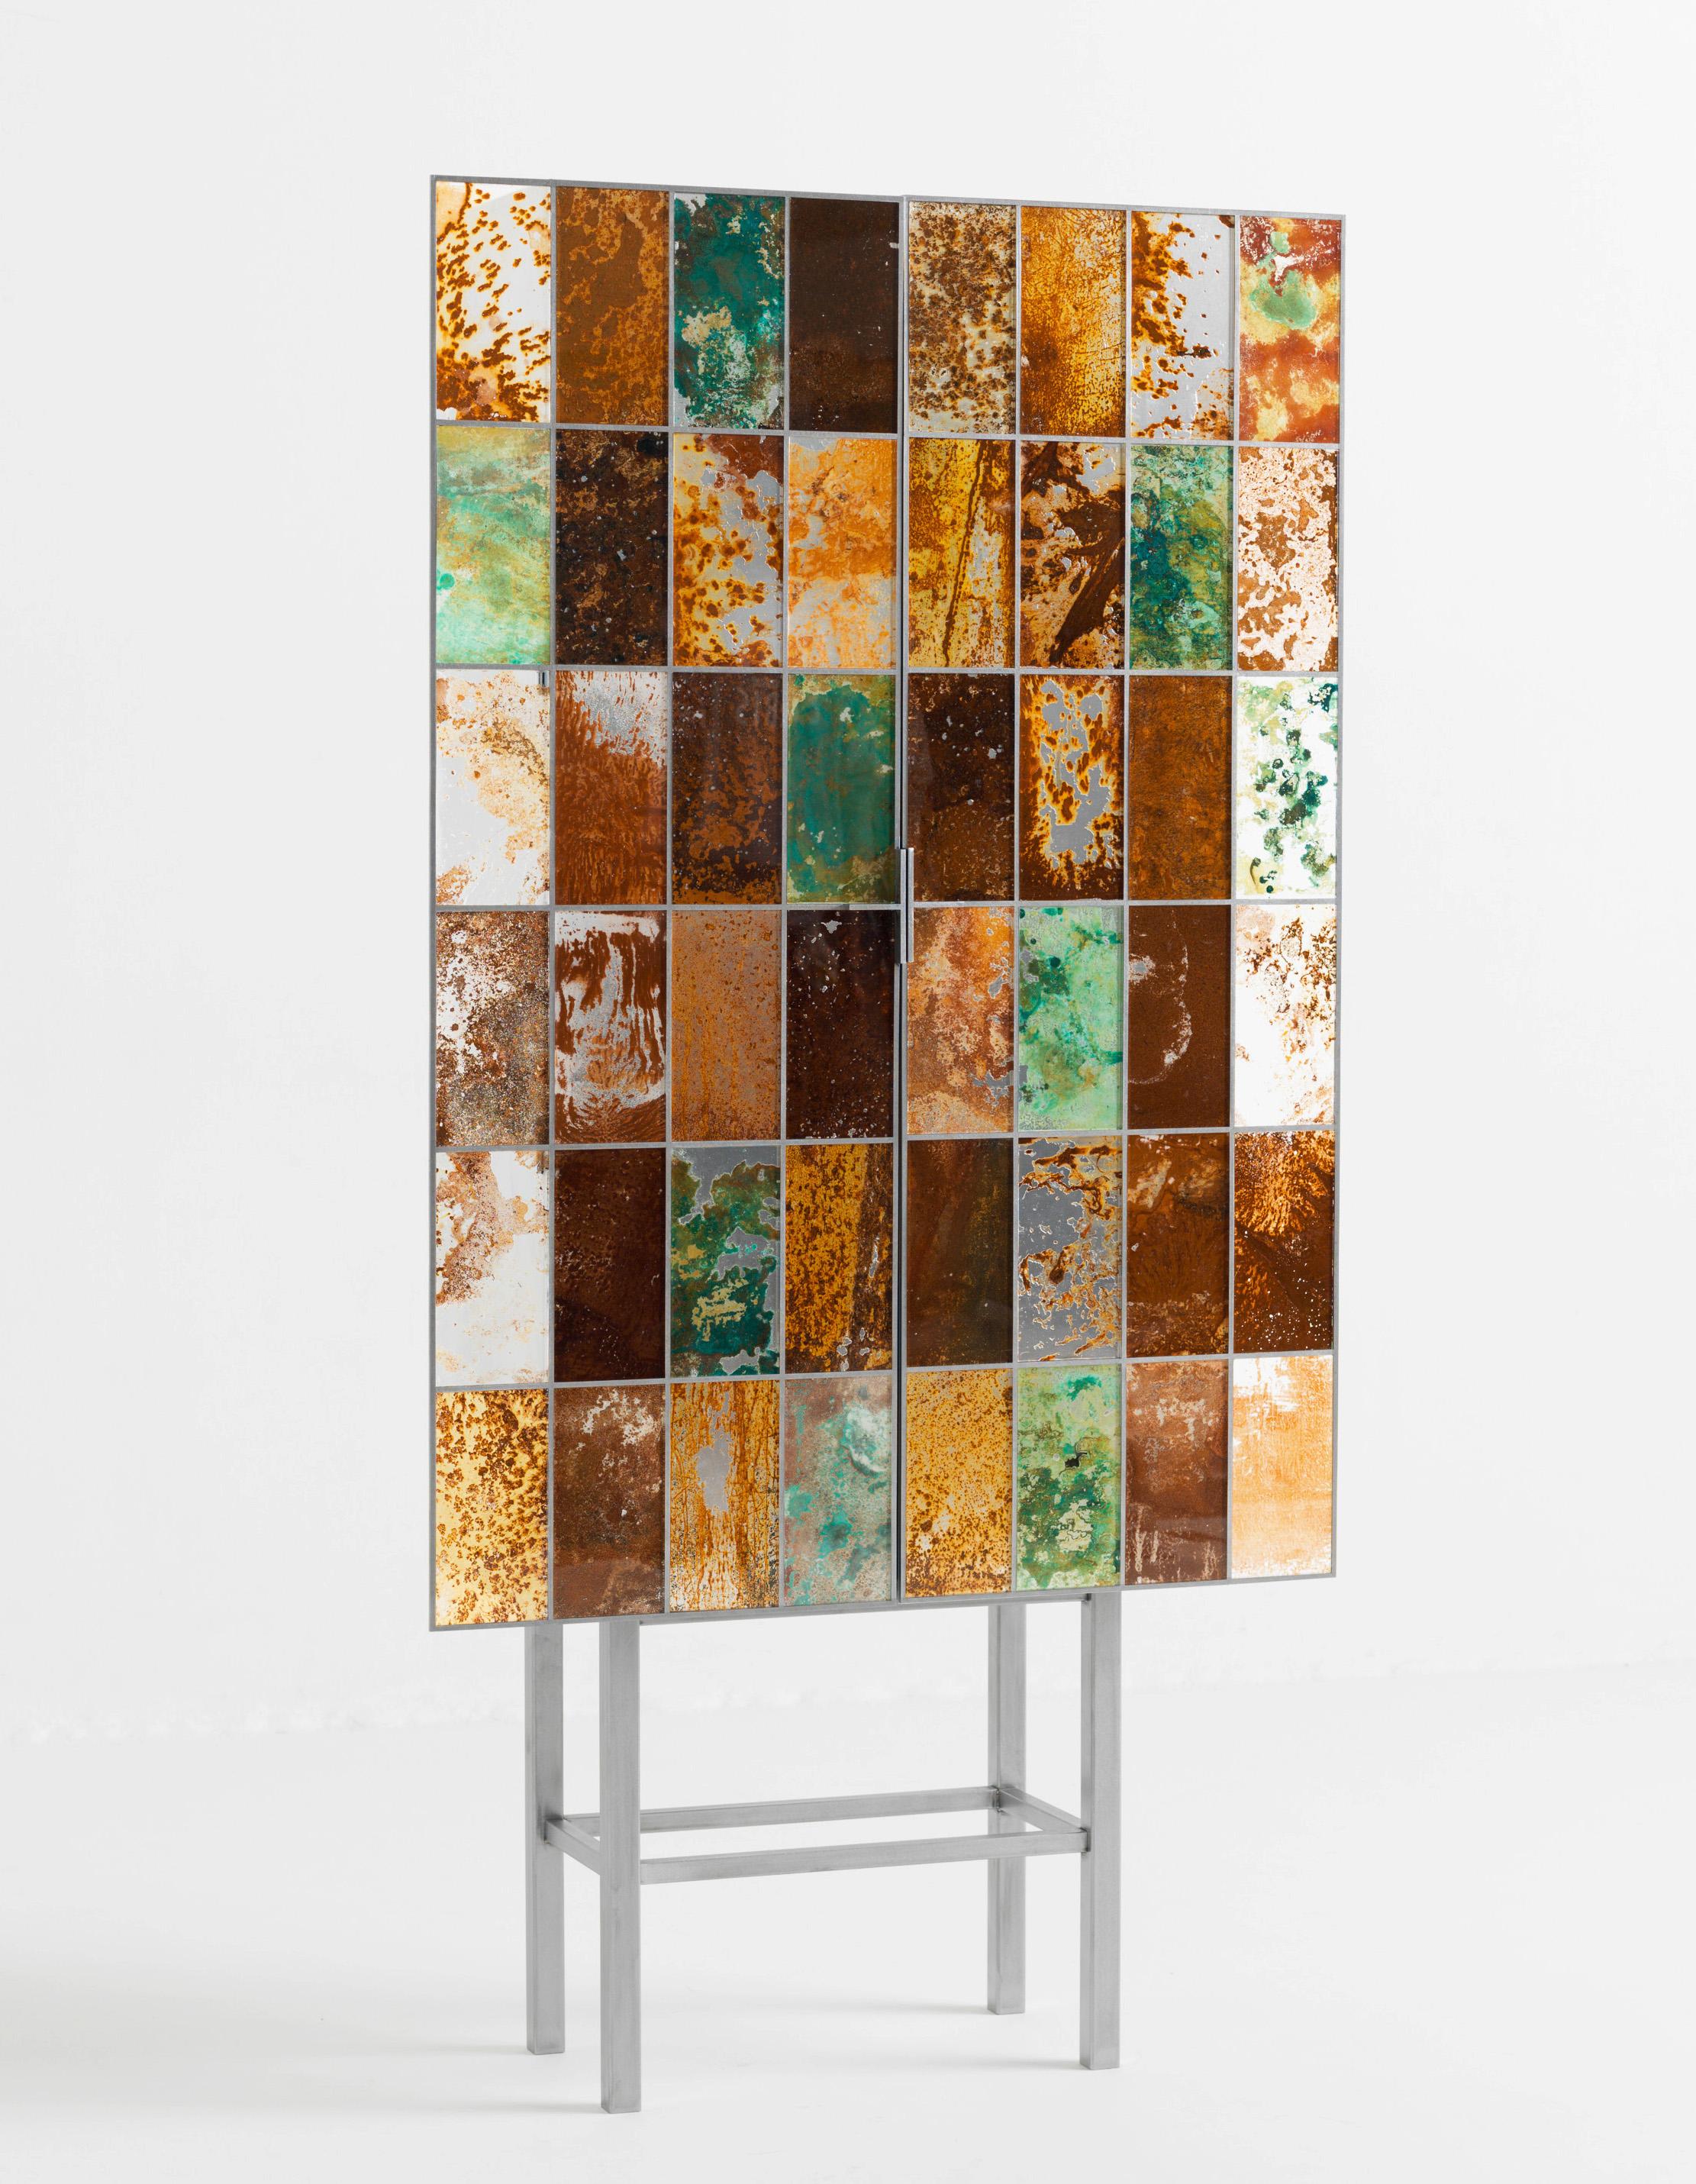 Cabinet designed by Yuma Kano.
Unique surface material of doors are acrylic. This acrylic is what rust was transformed. Artist calls it 